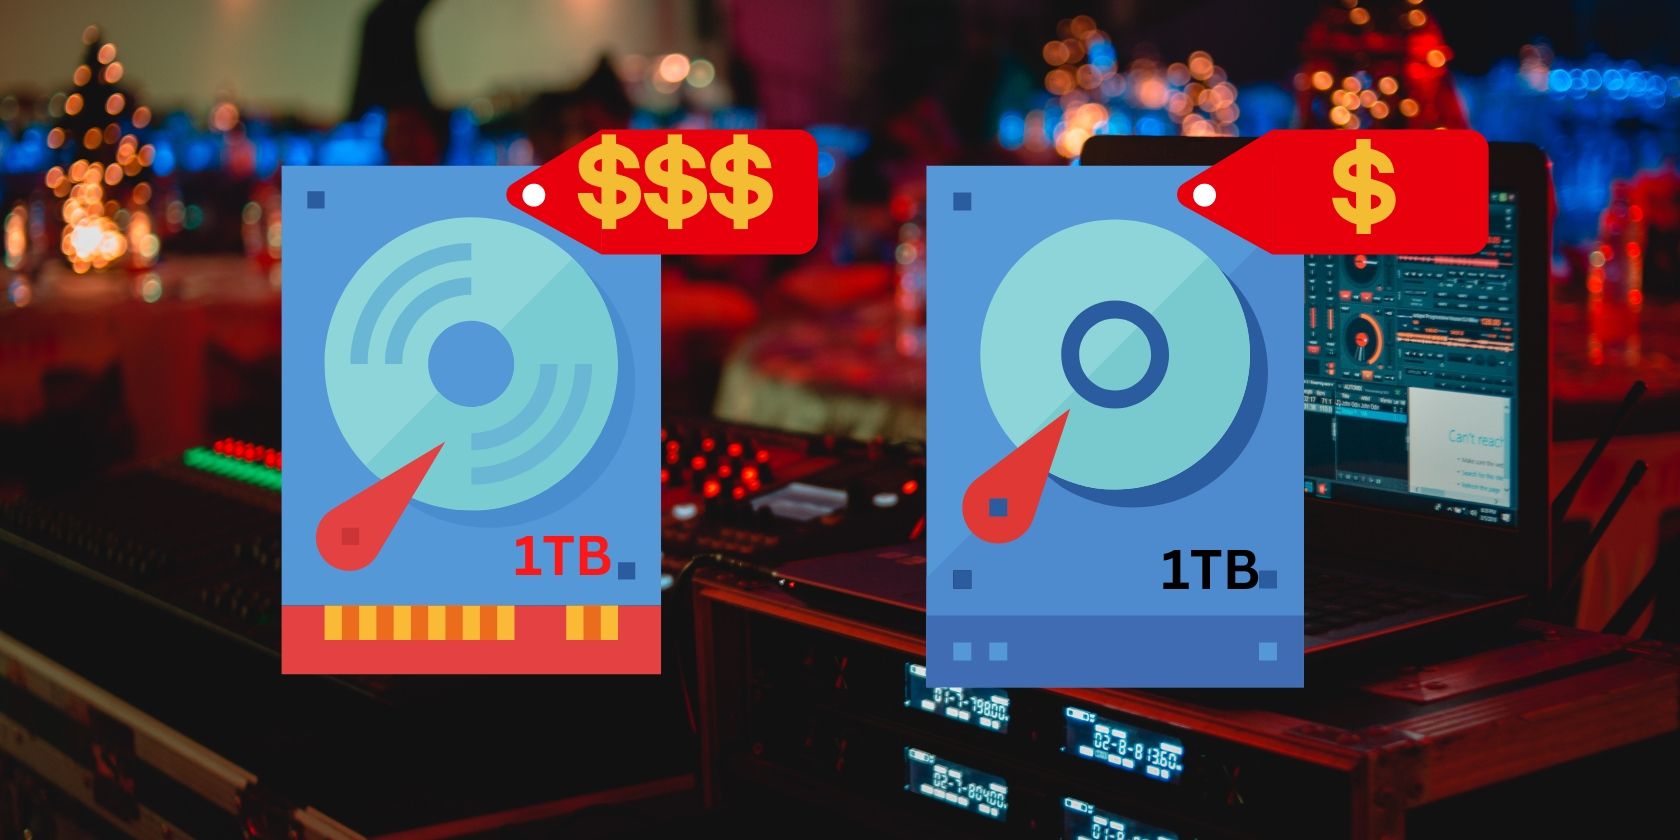 two 1tb drives as a vector image with a laptop background